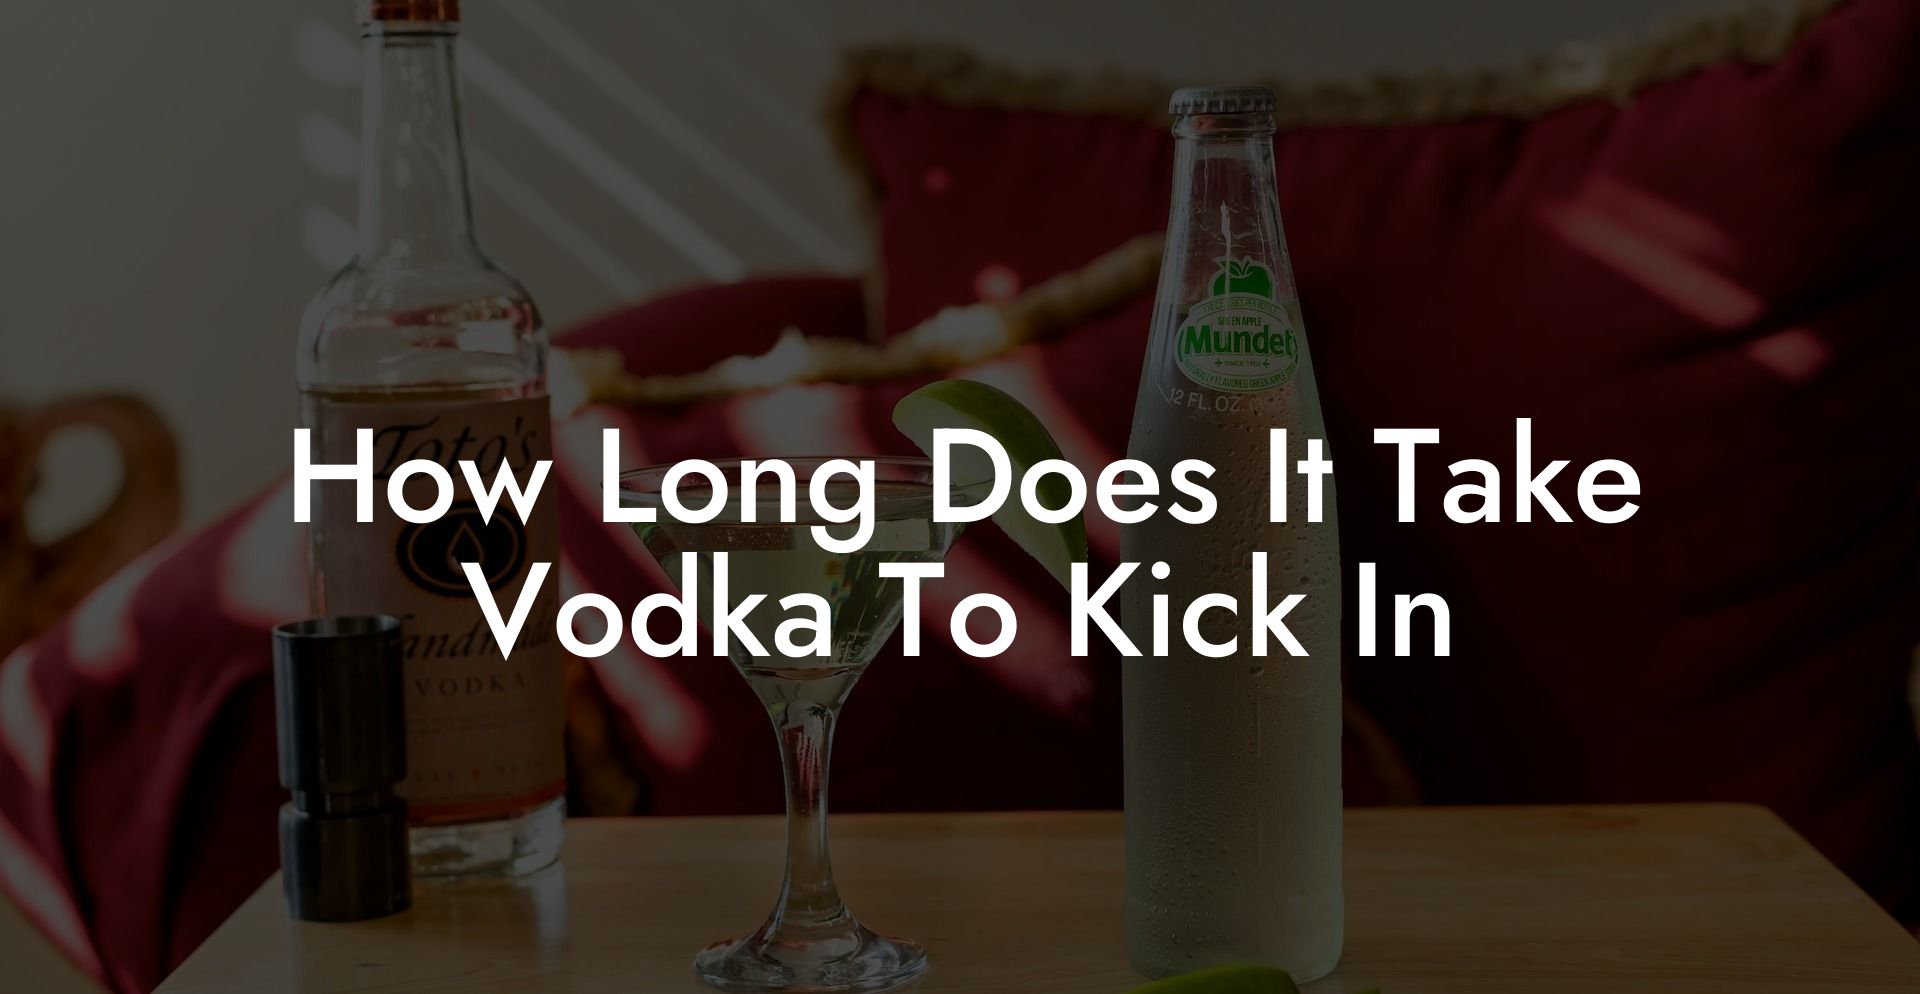 How Long Does It Take Vodka To Kick In